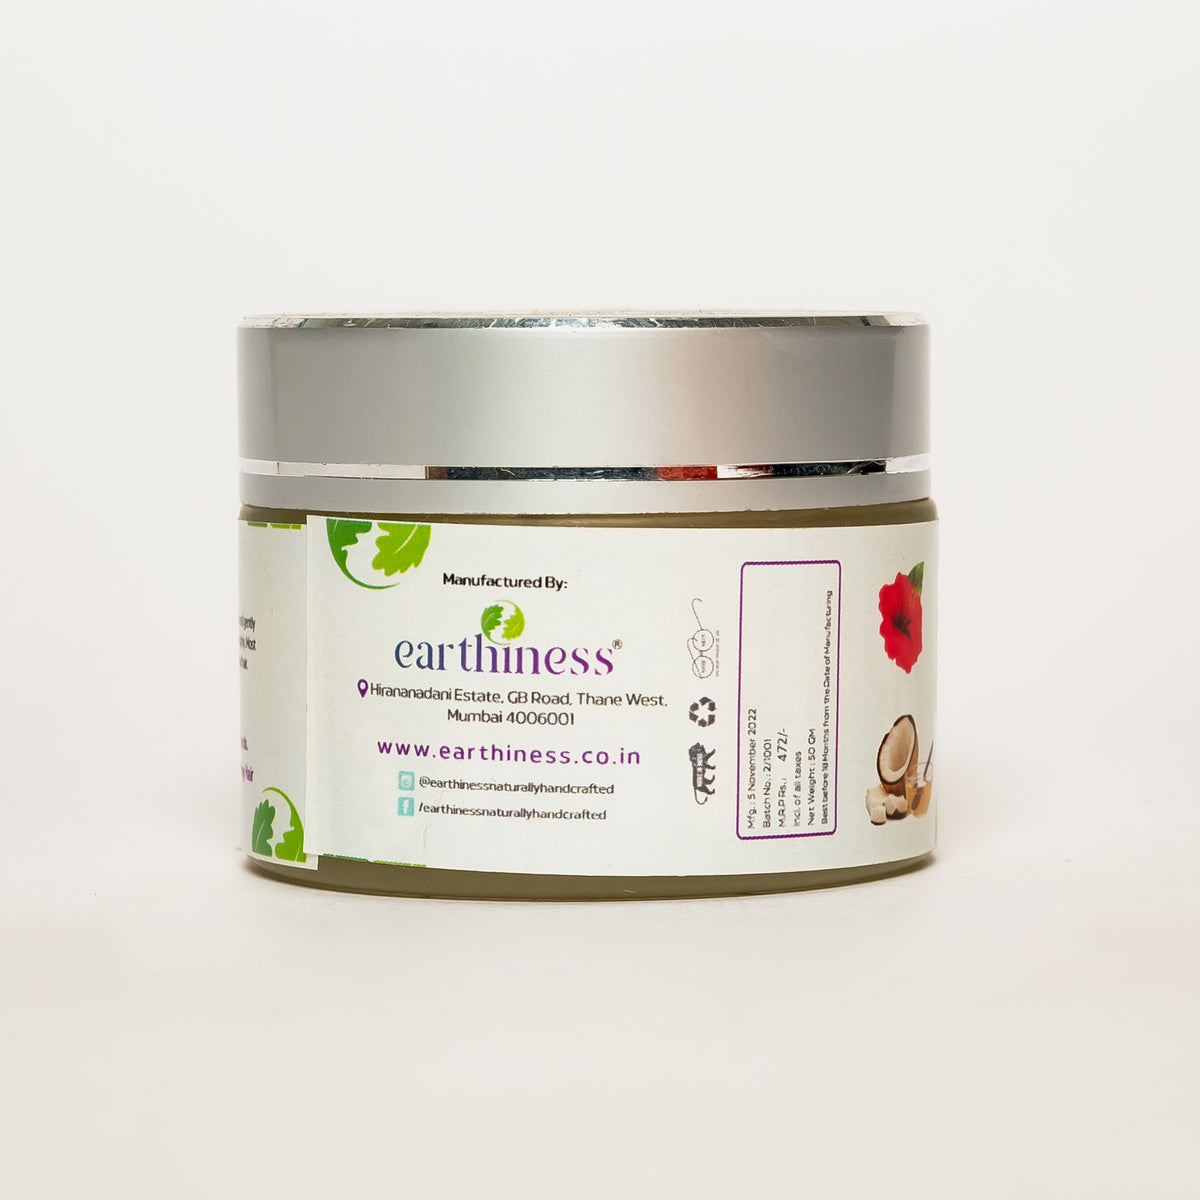 Organic Hair Conditioner with Almond Oil & Shea Butter To Improve Hair Texture